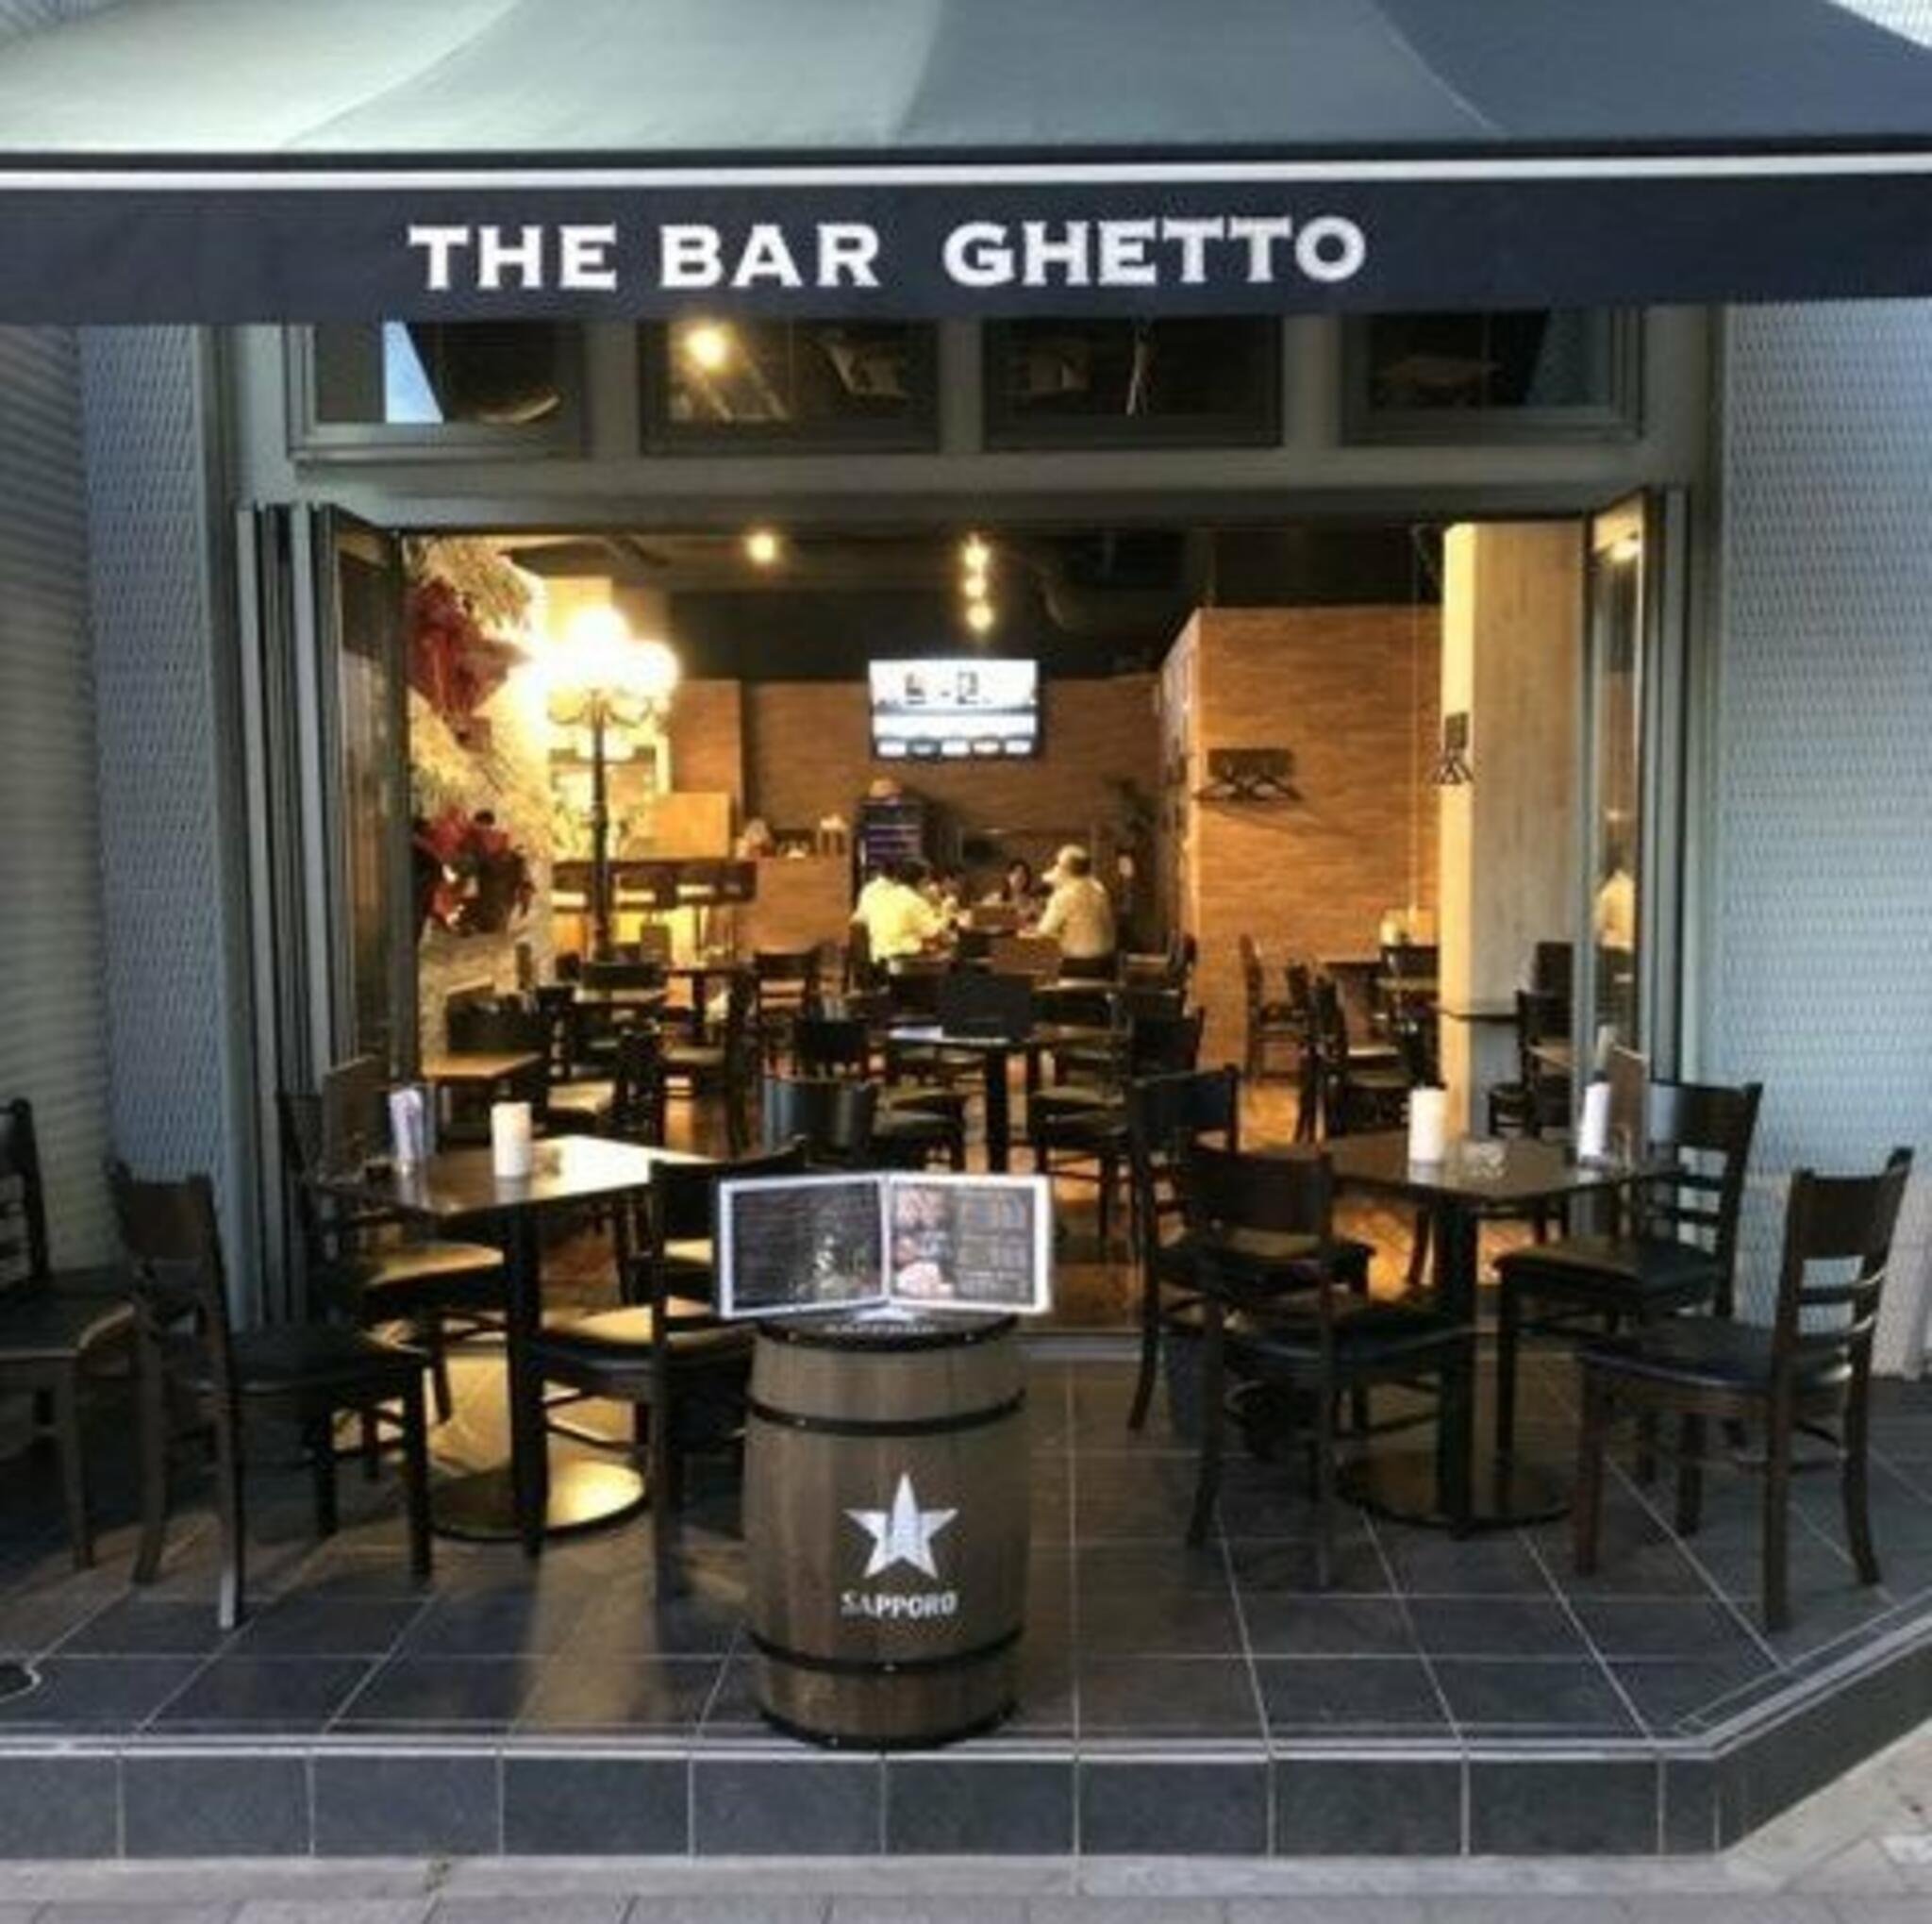 meat and bar Ghettoの代表写真1